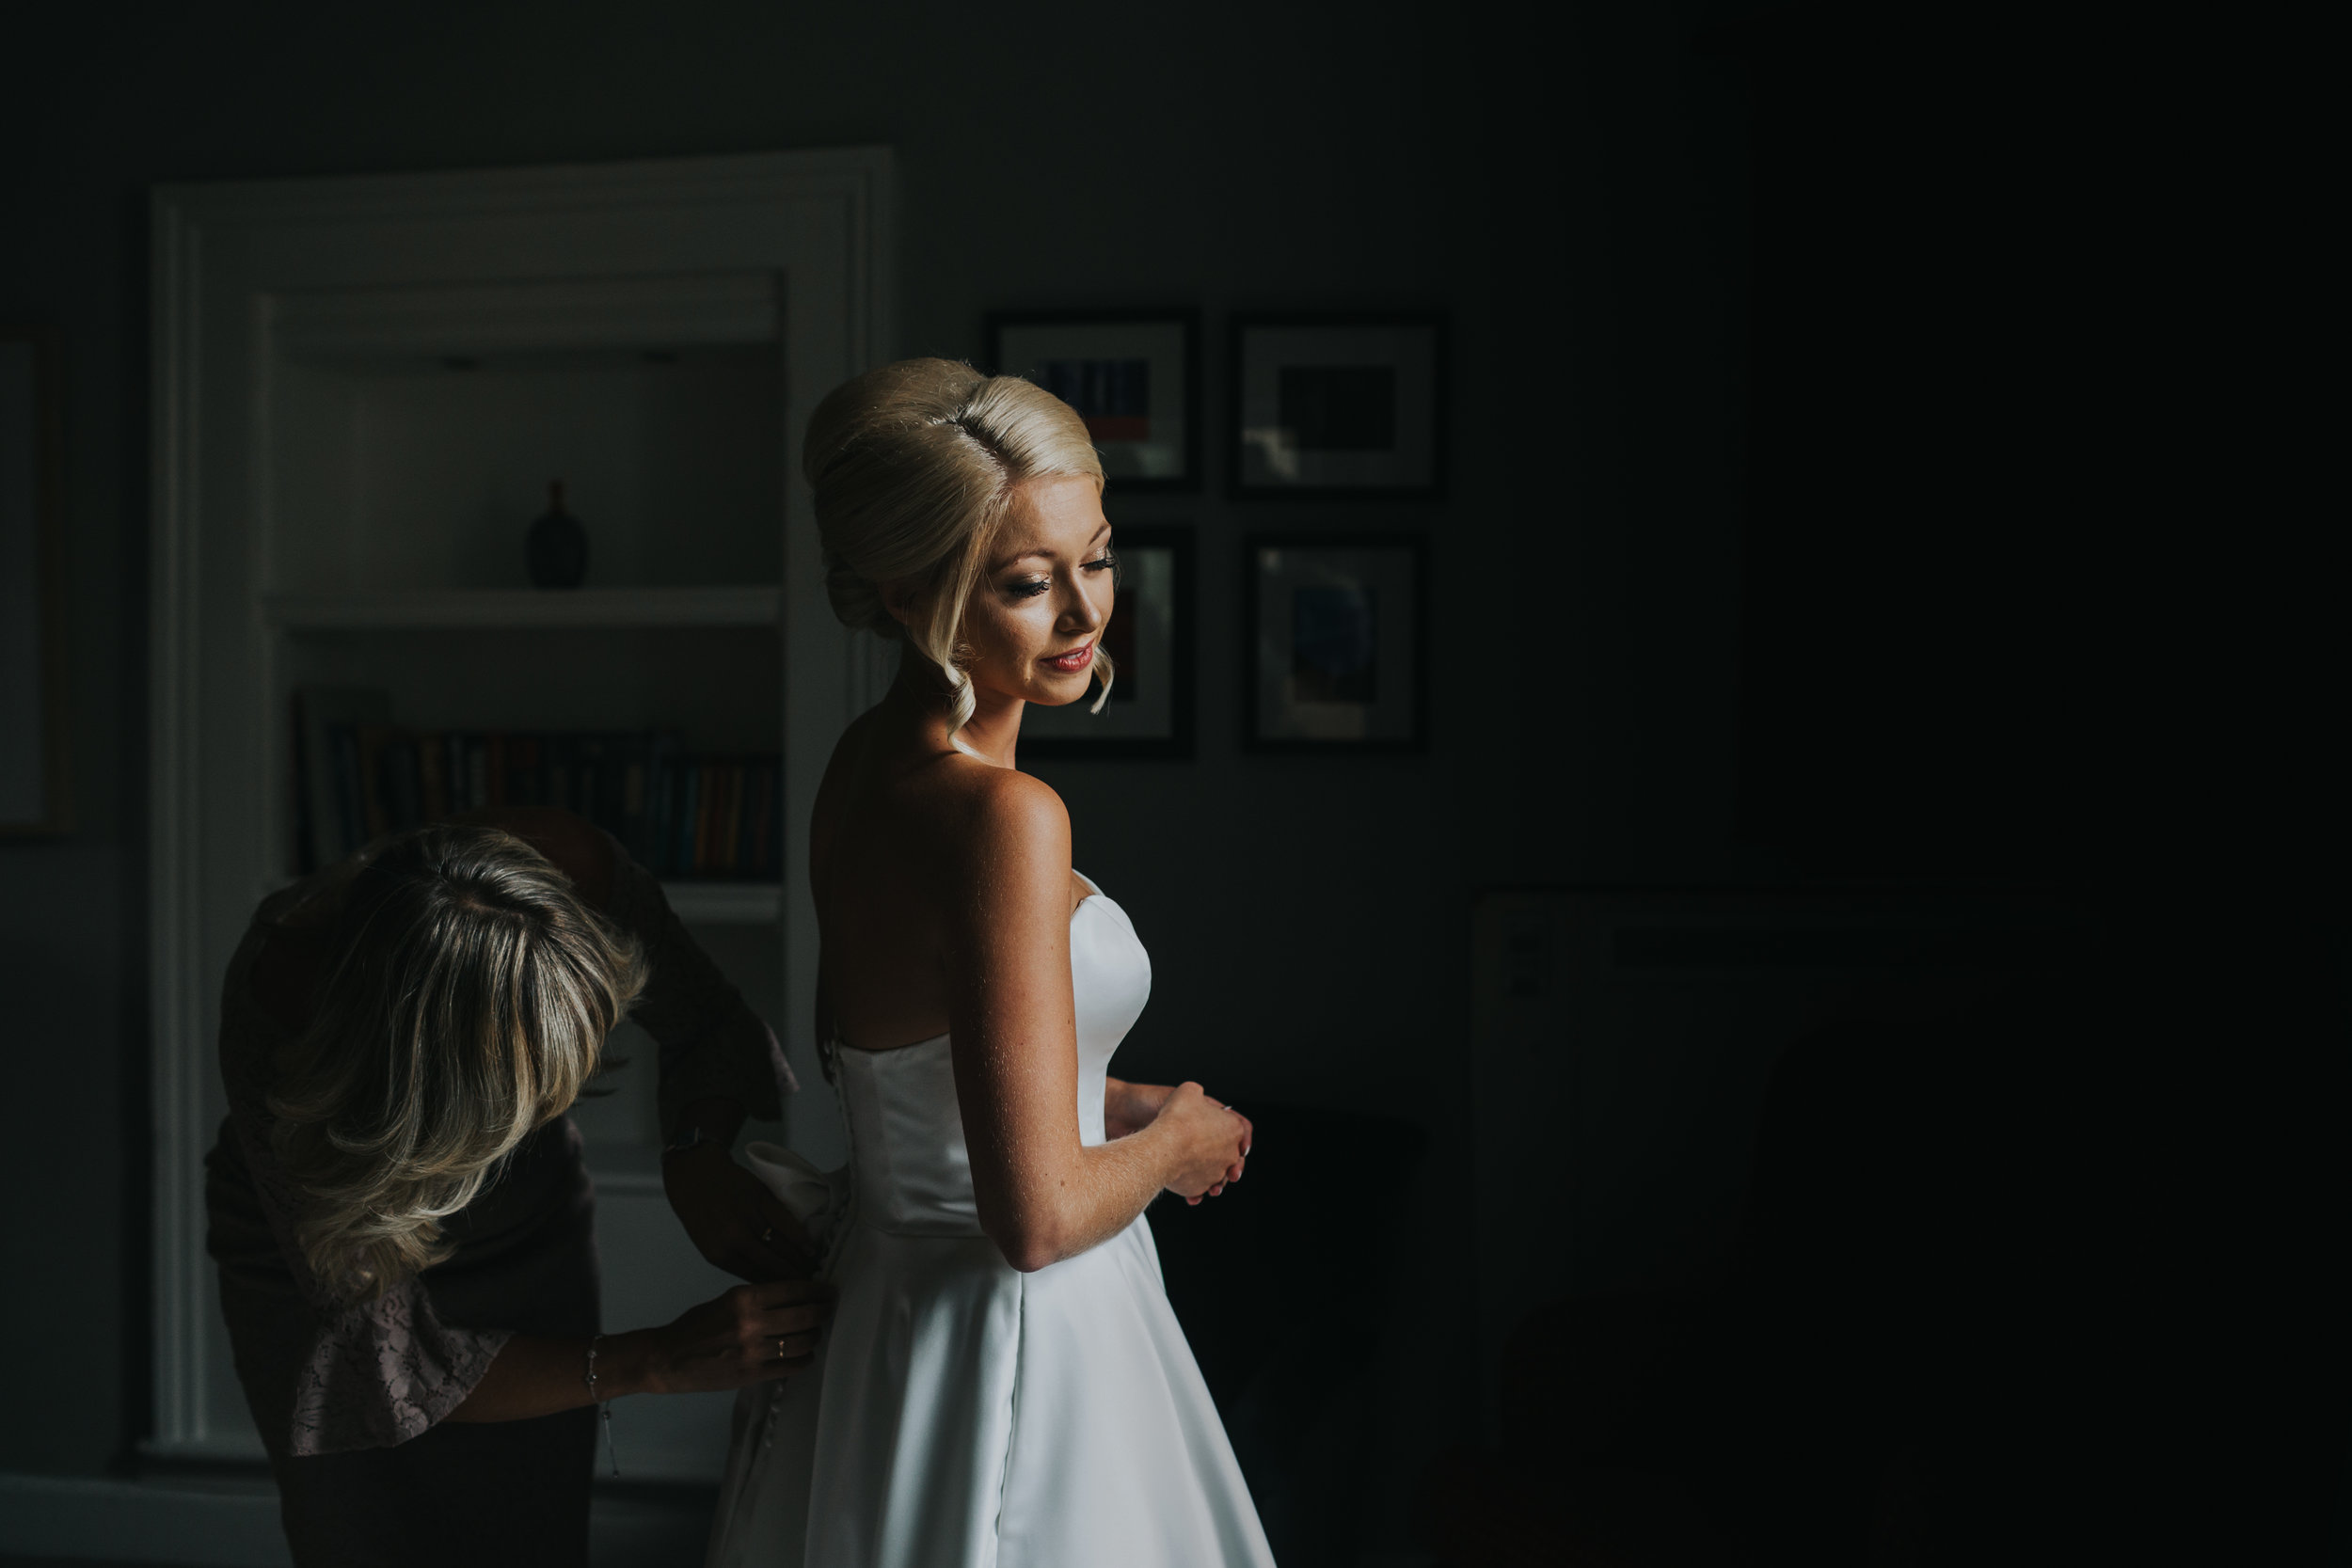 The bride stands in window light as her mother helps her put on her dress. (Copy)